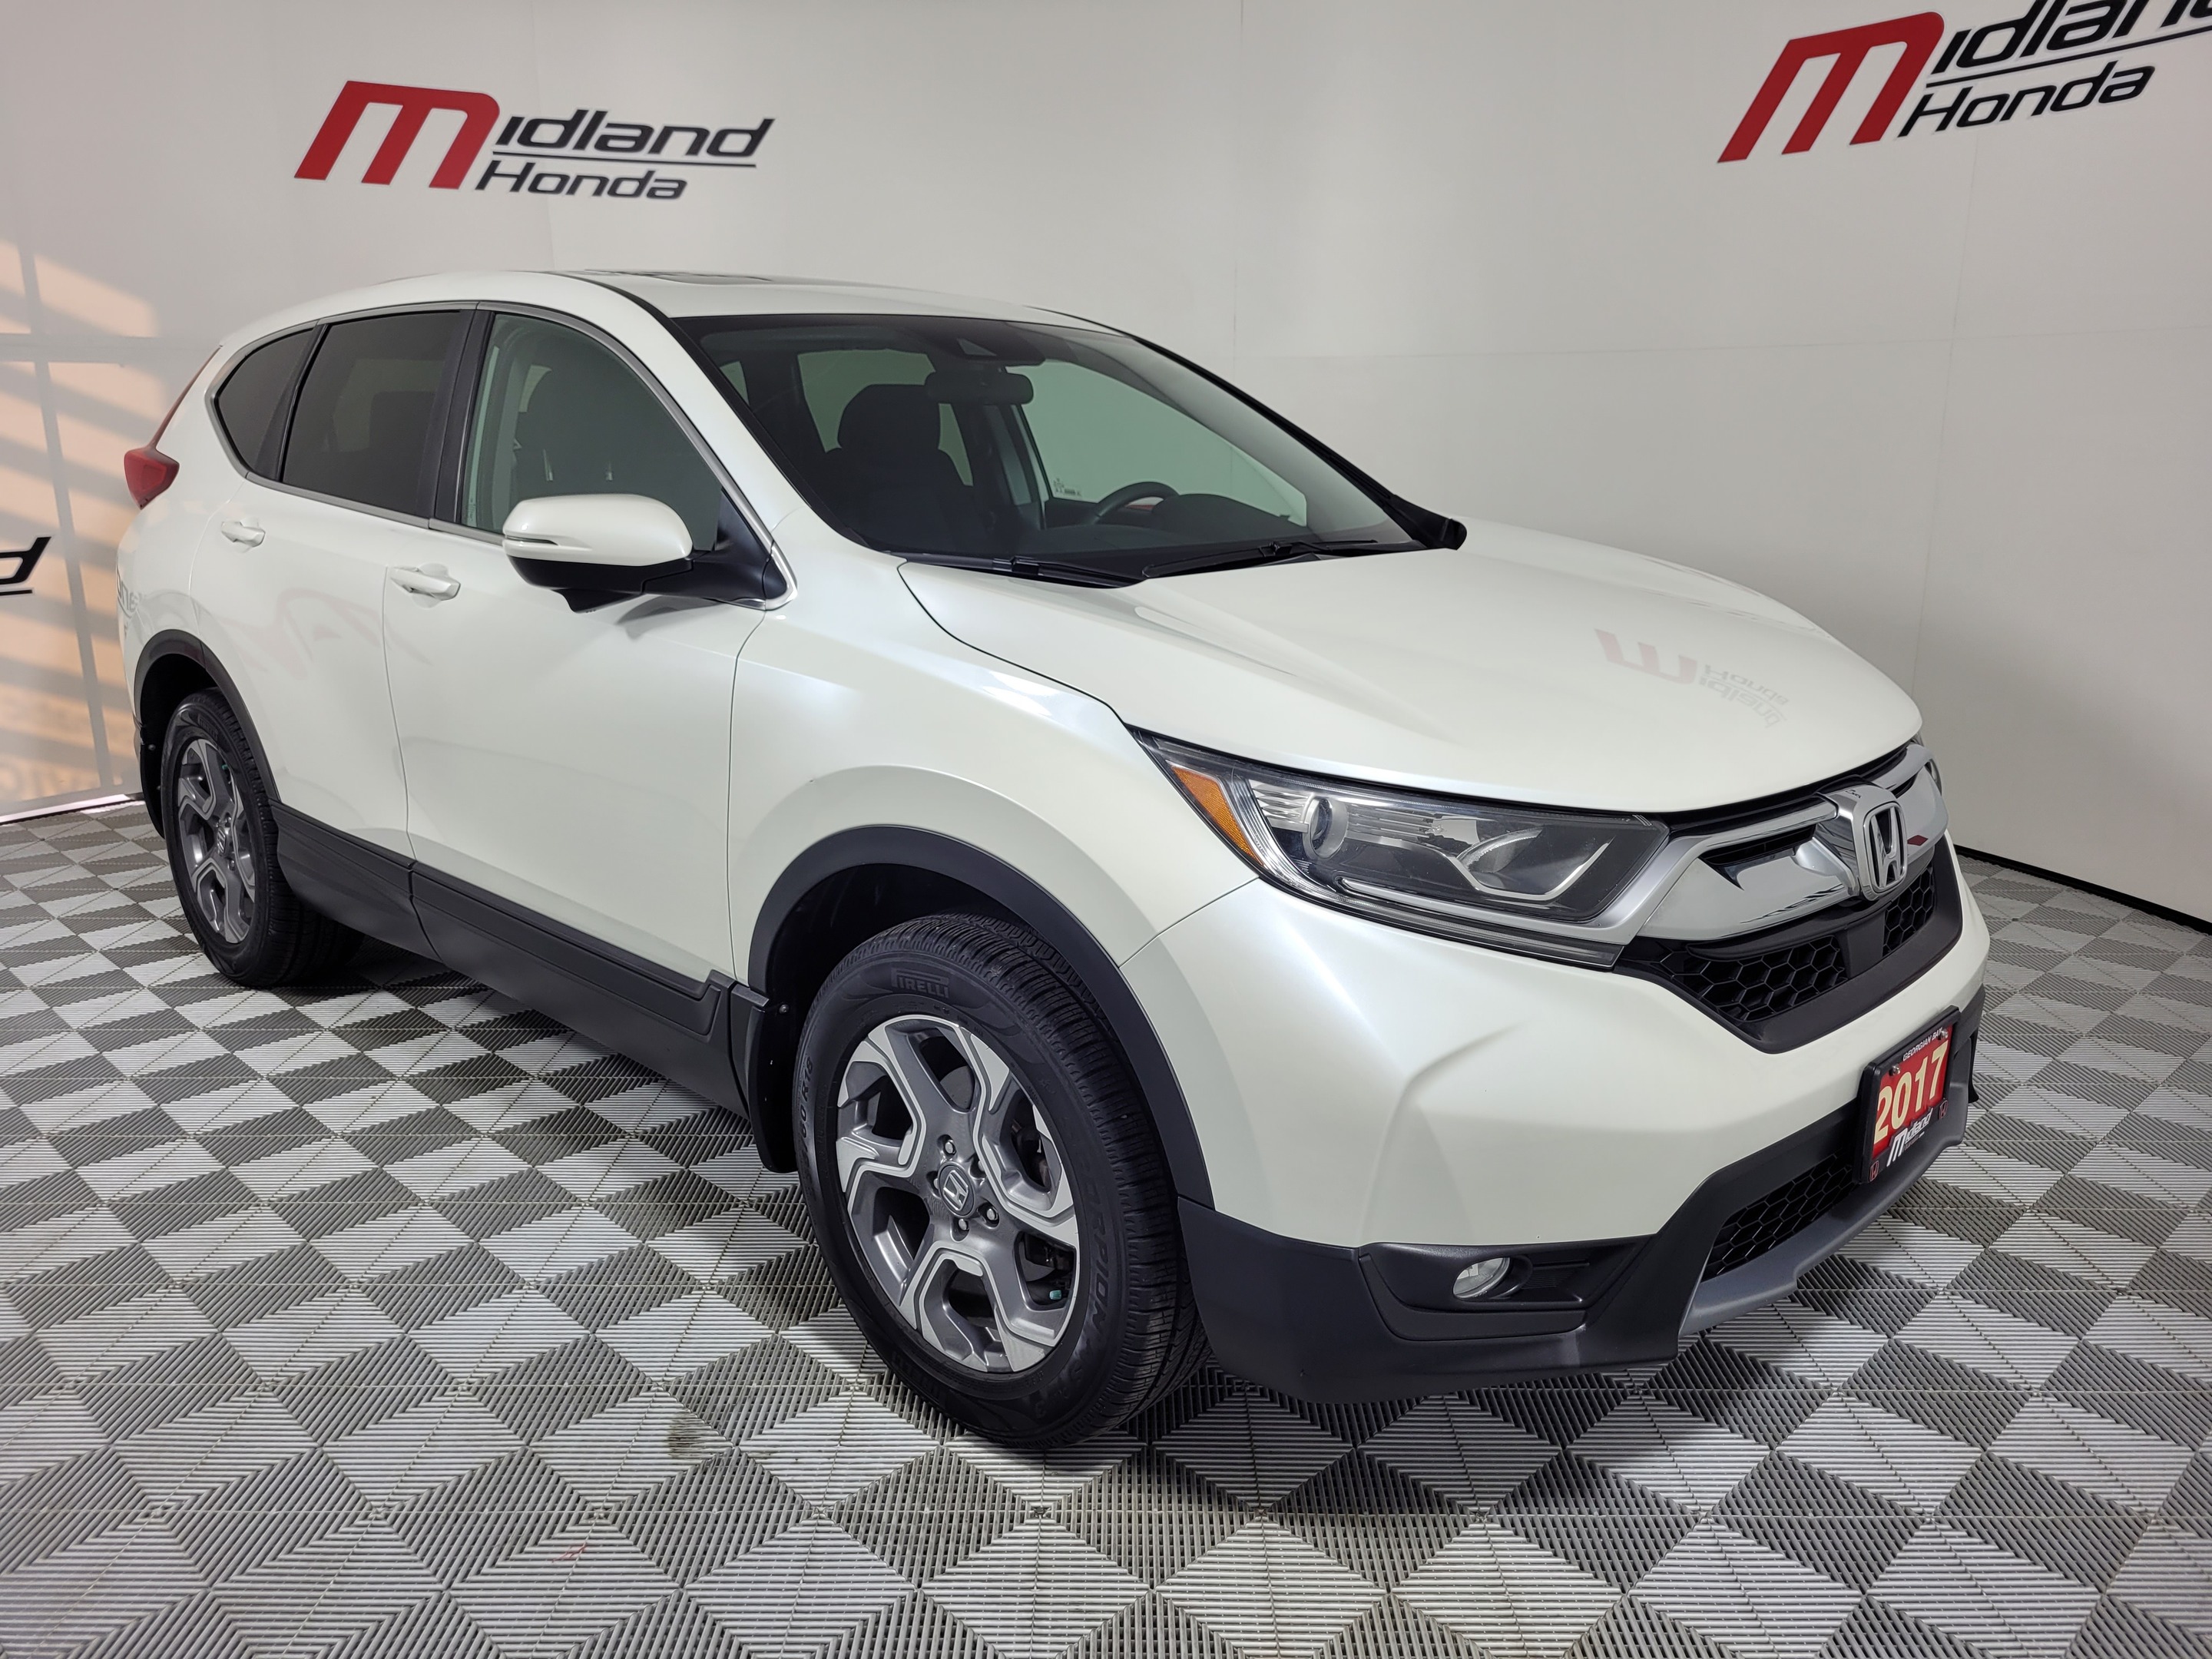 2017 Honda CR-V EX AWD | Sunroof | Android/Apple | Accident Free!